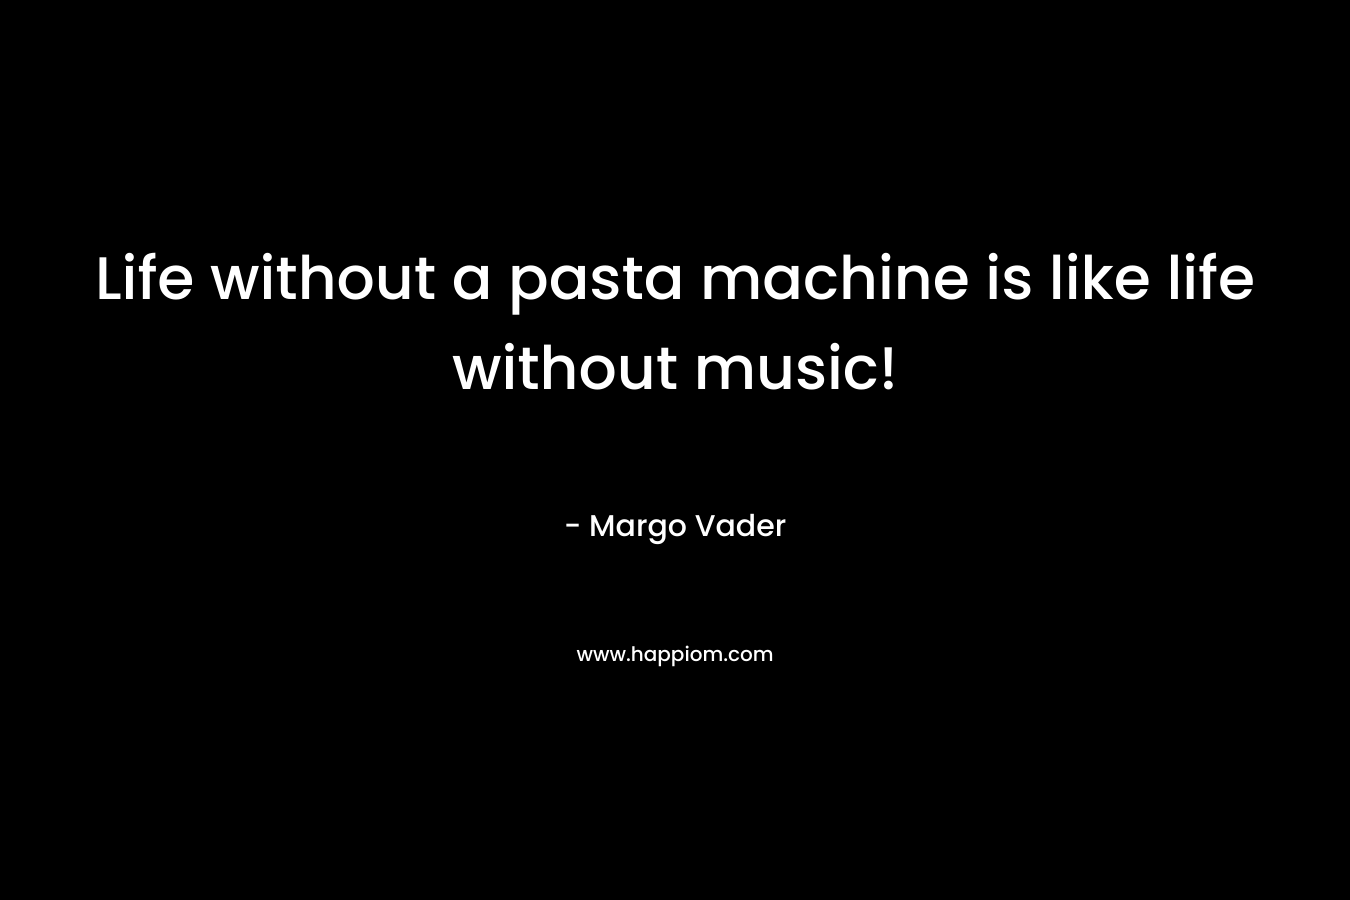 Life without a pasta machine is like life without music!